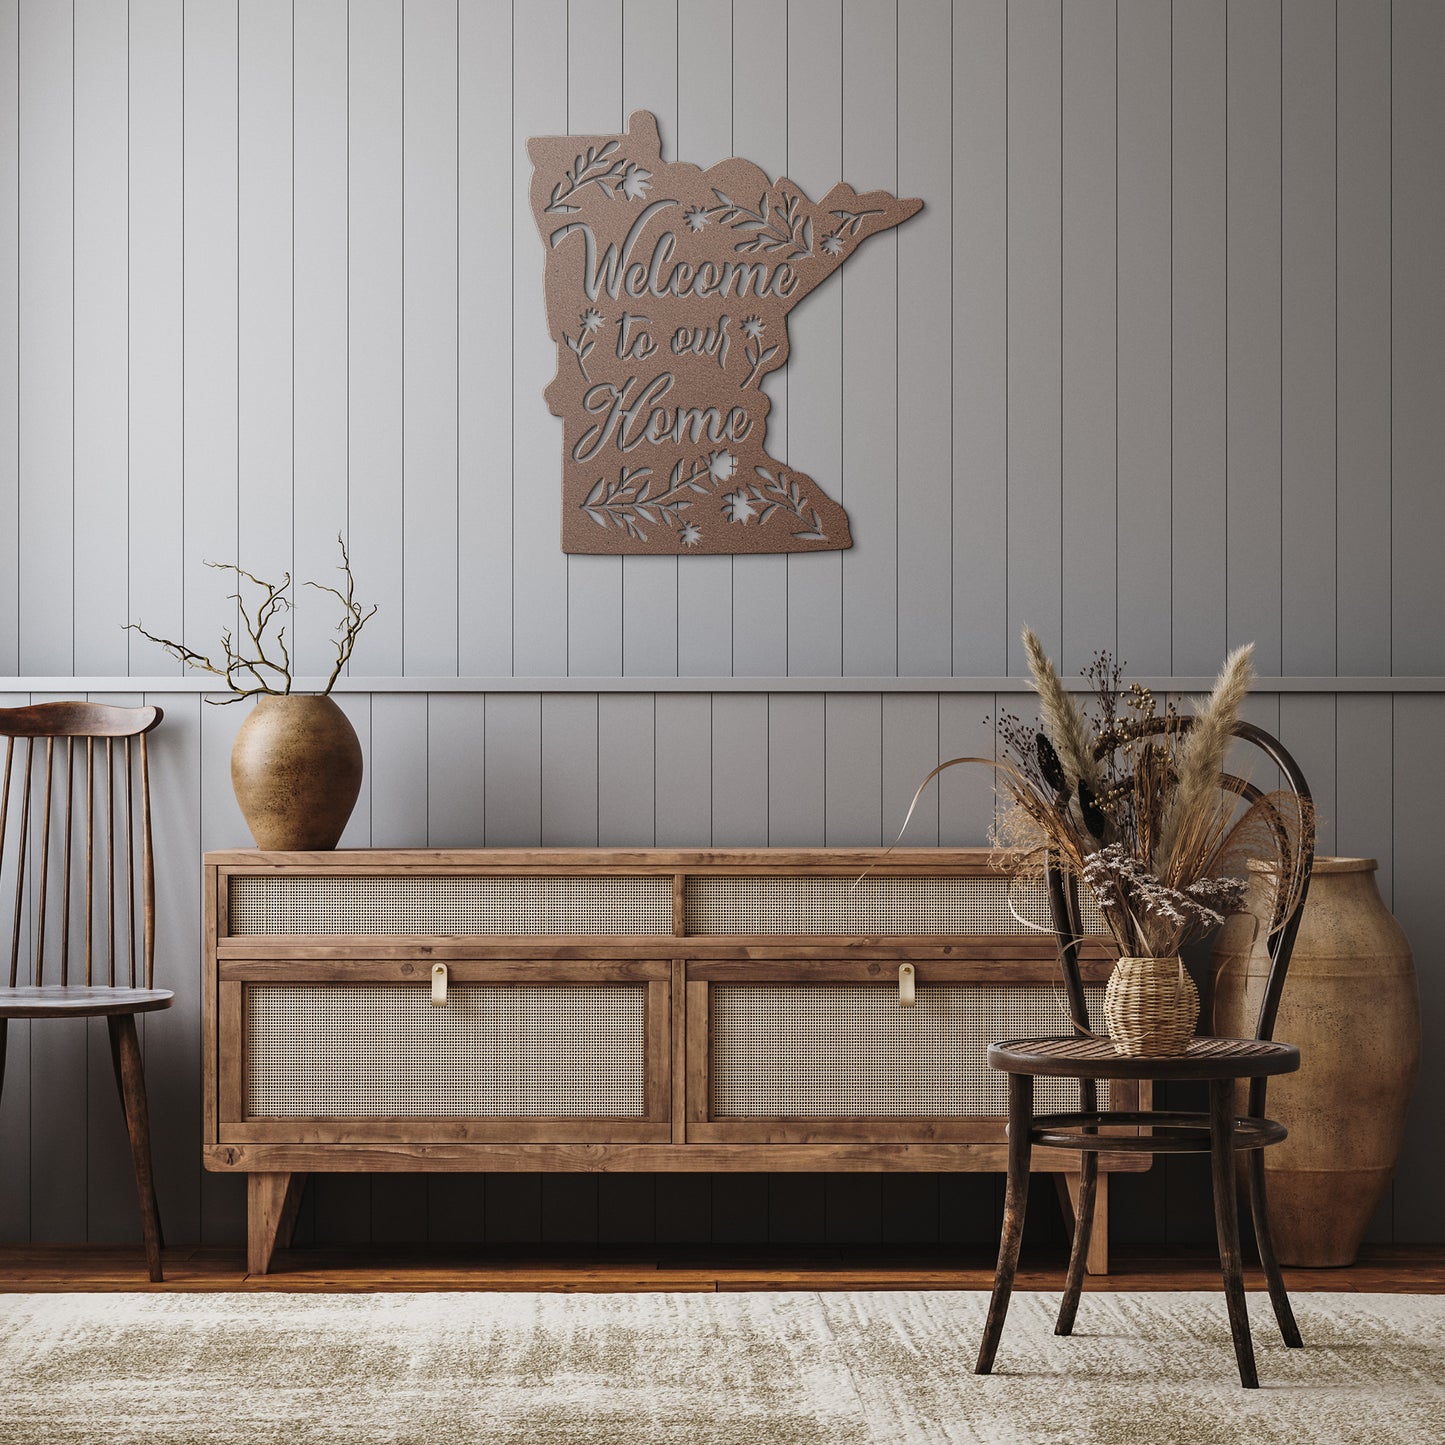 Welcome Home to Minnesota: State Outline Metal Art with 'Welcome to Our Home' Design"